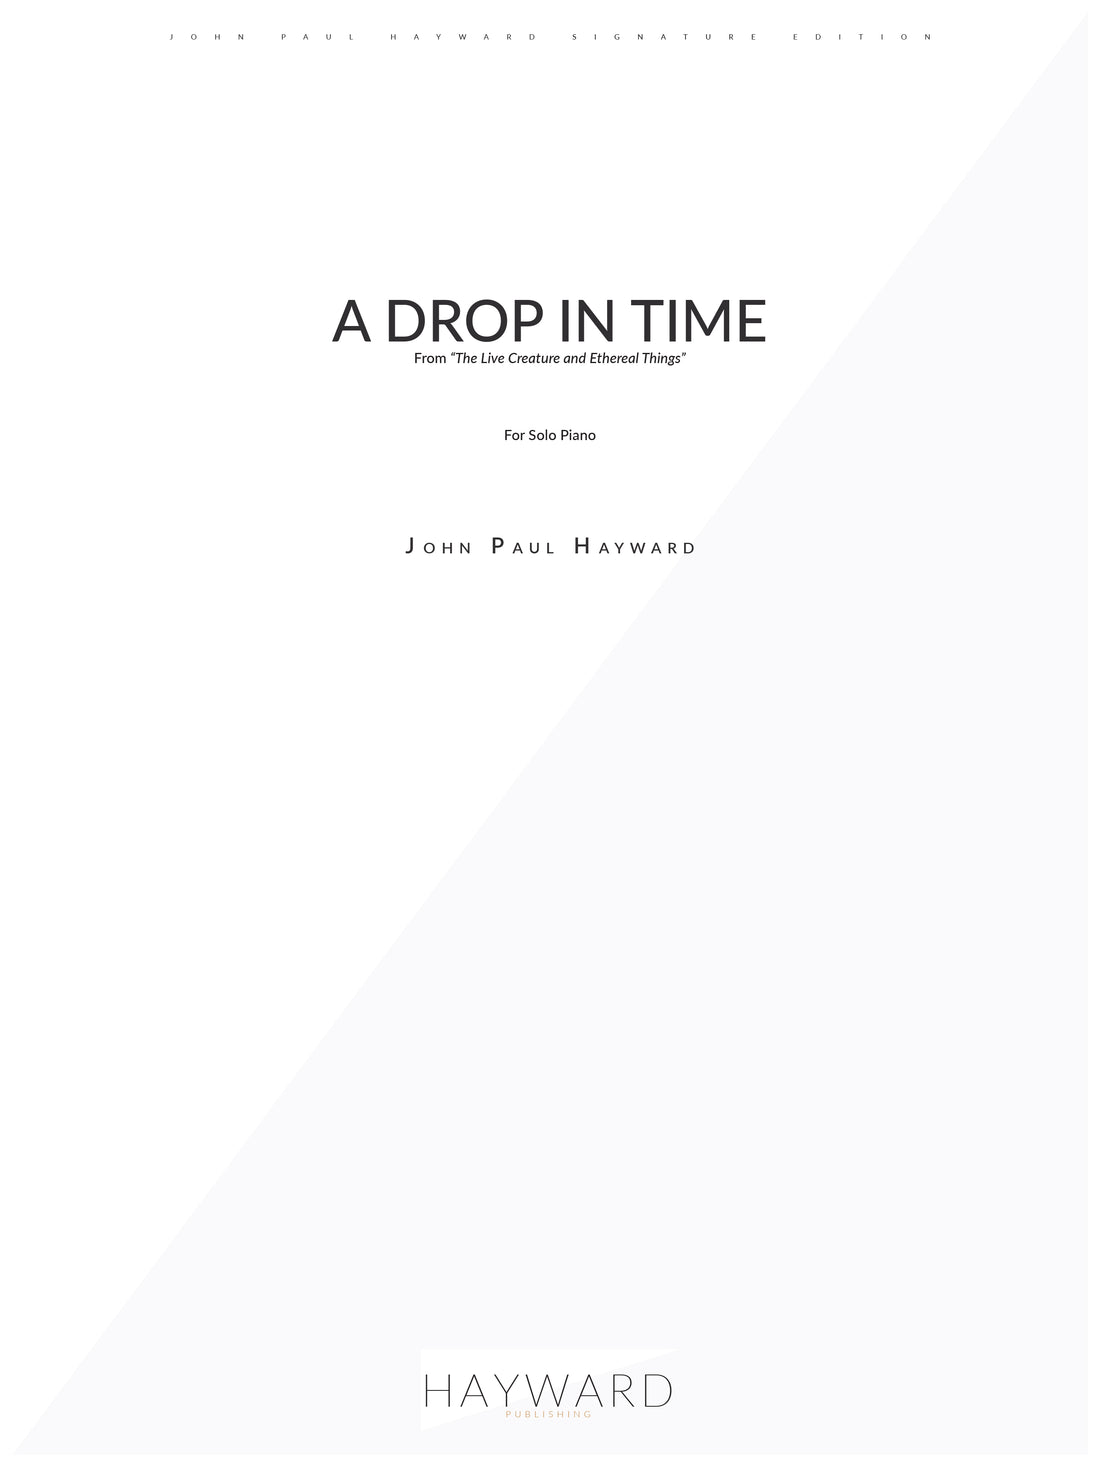 A Drop in Time